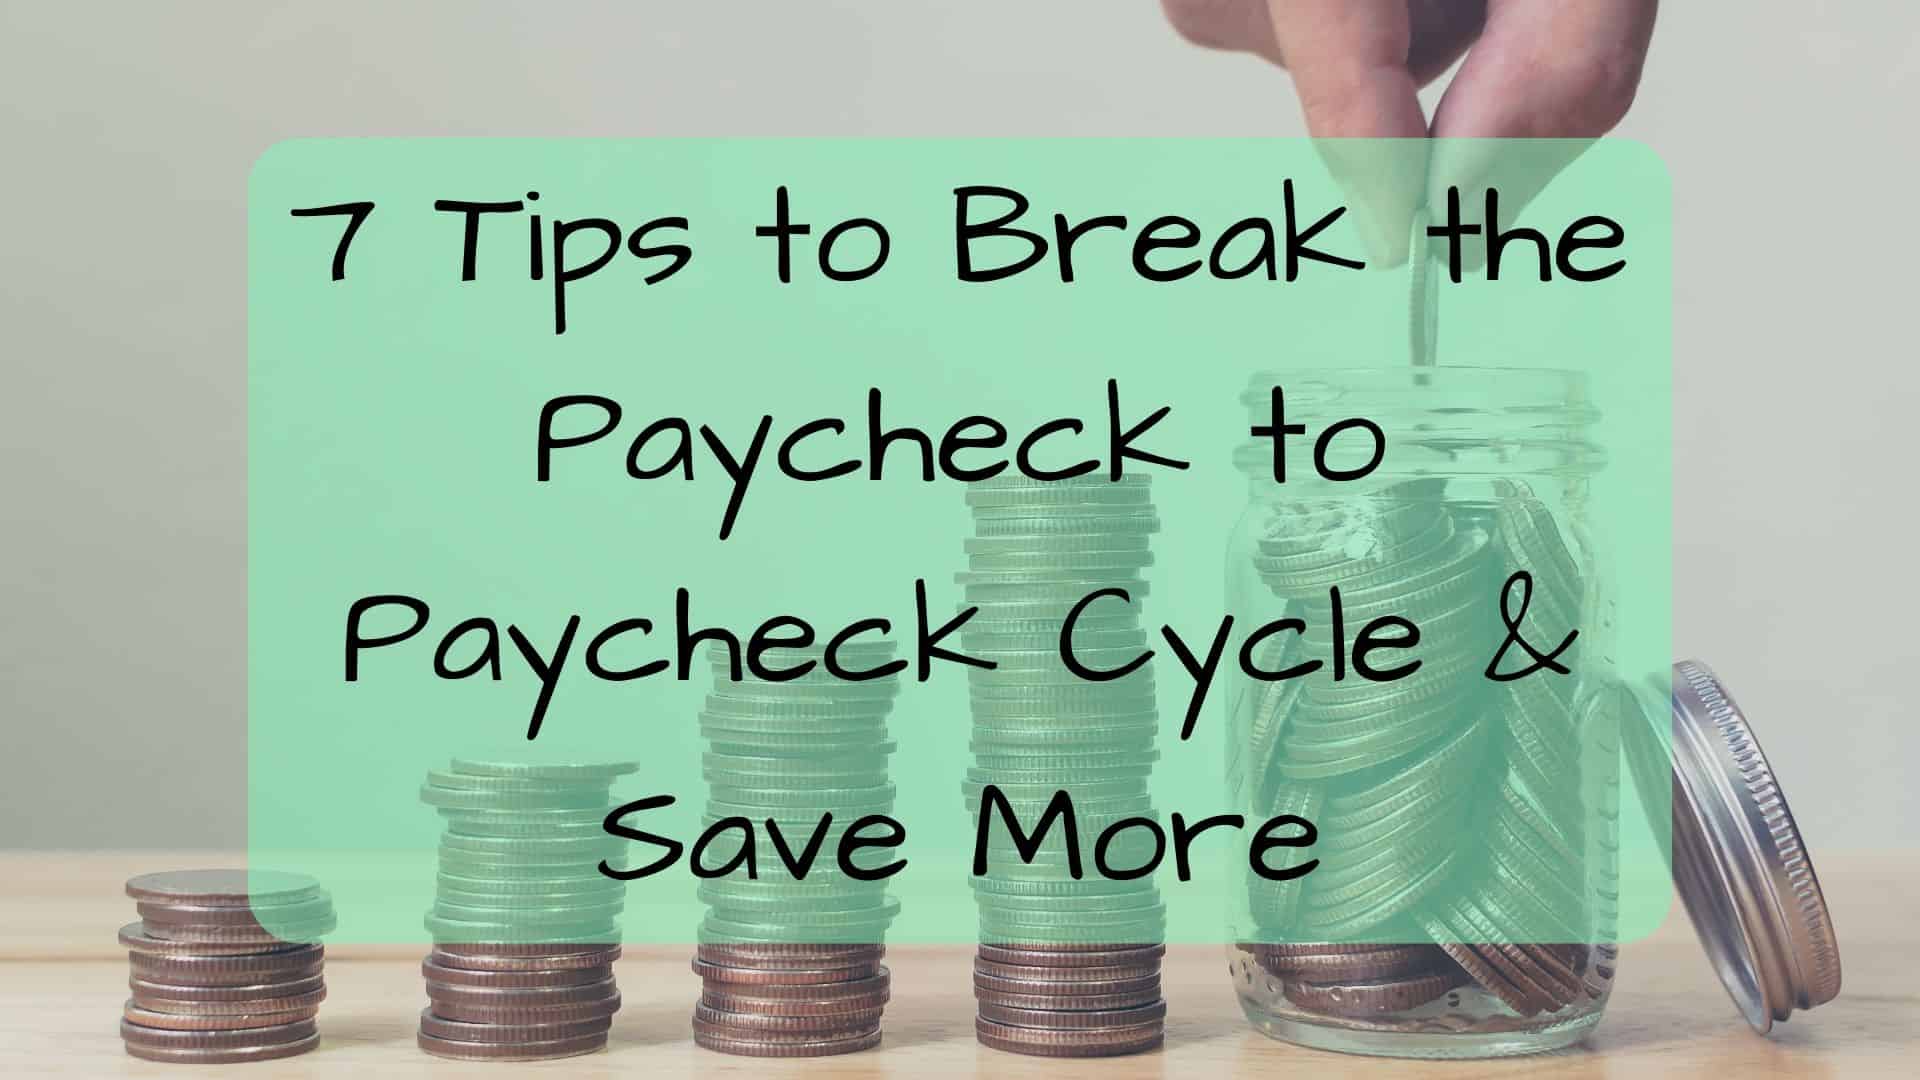 7 Tips to Break the Paycheck to Paycheck Cycle and Save More